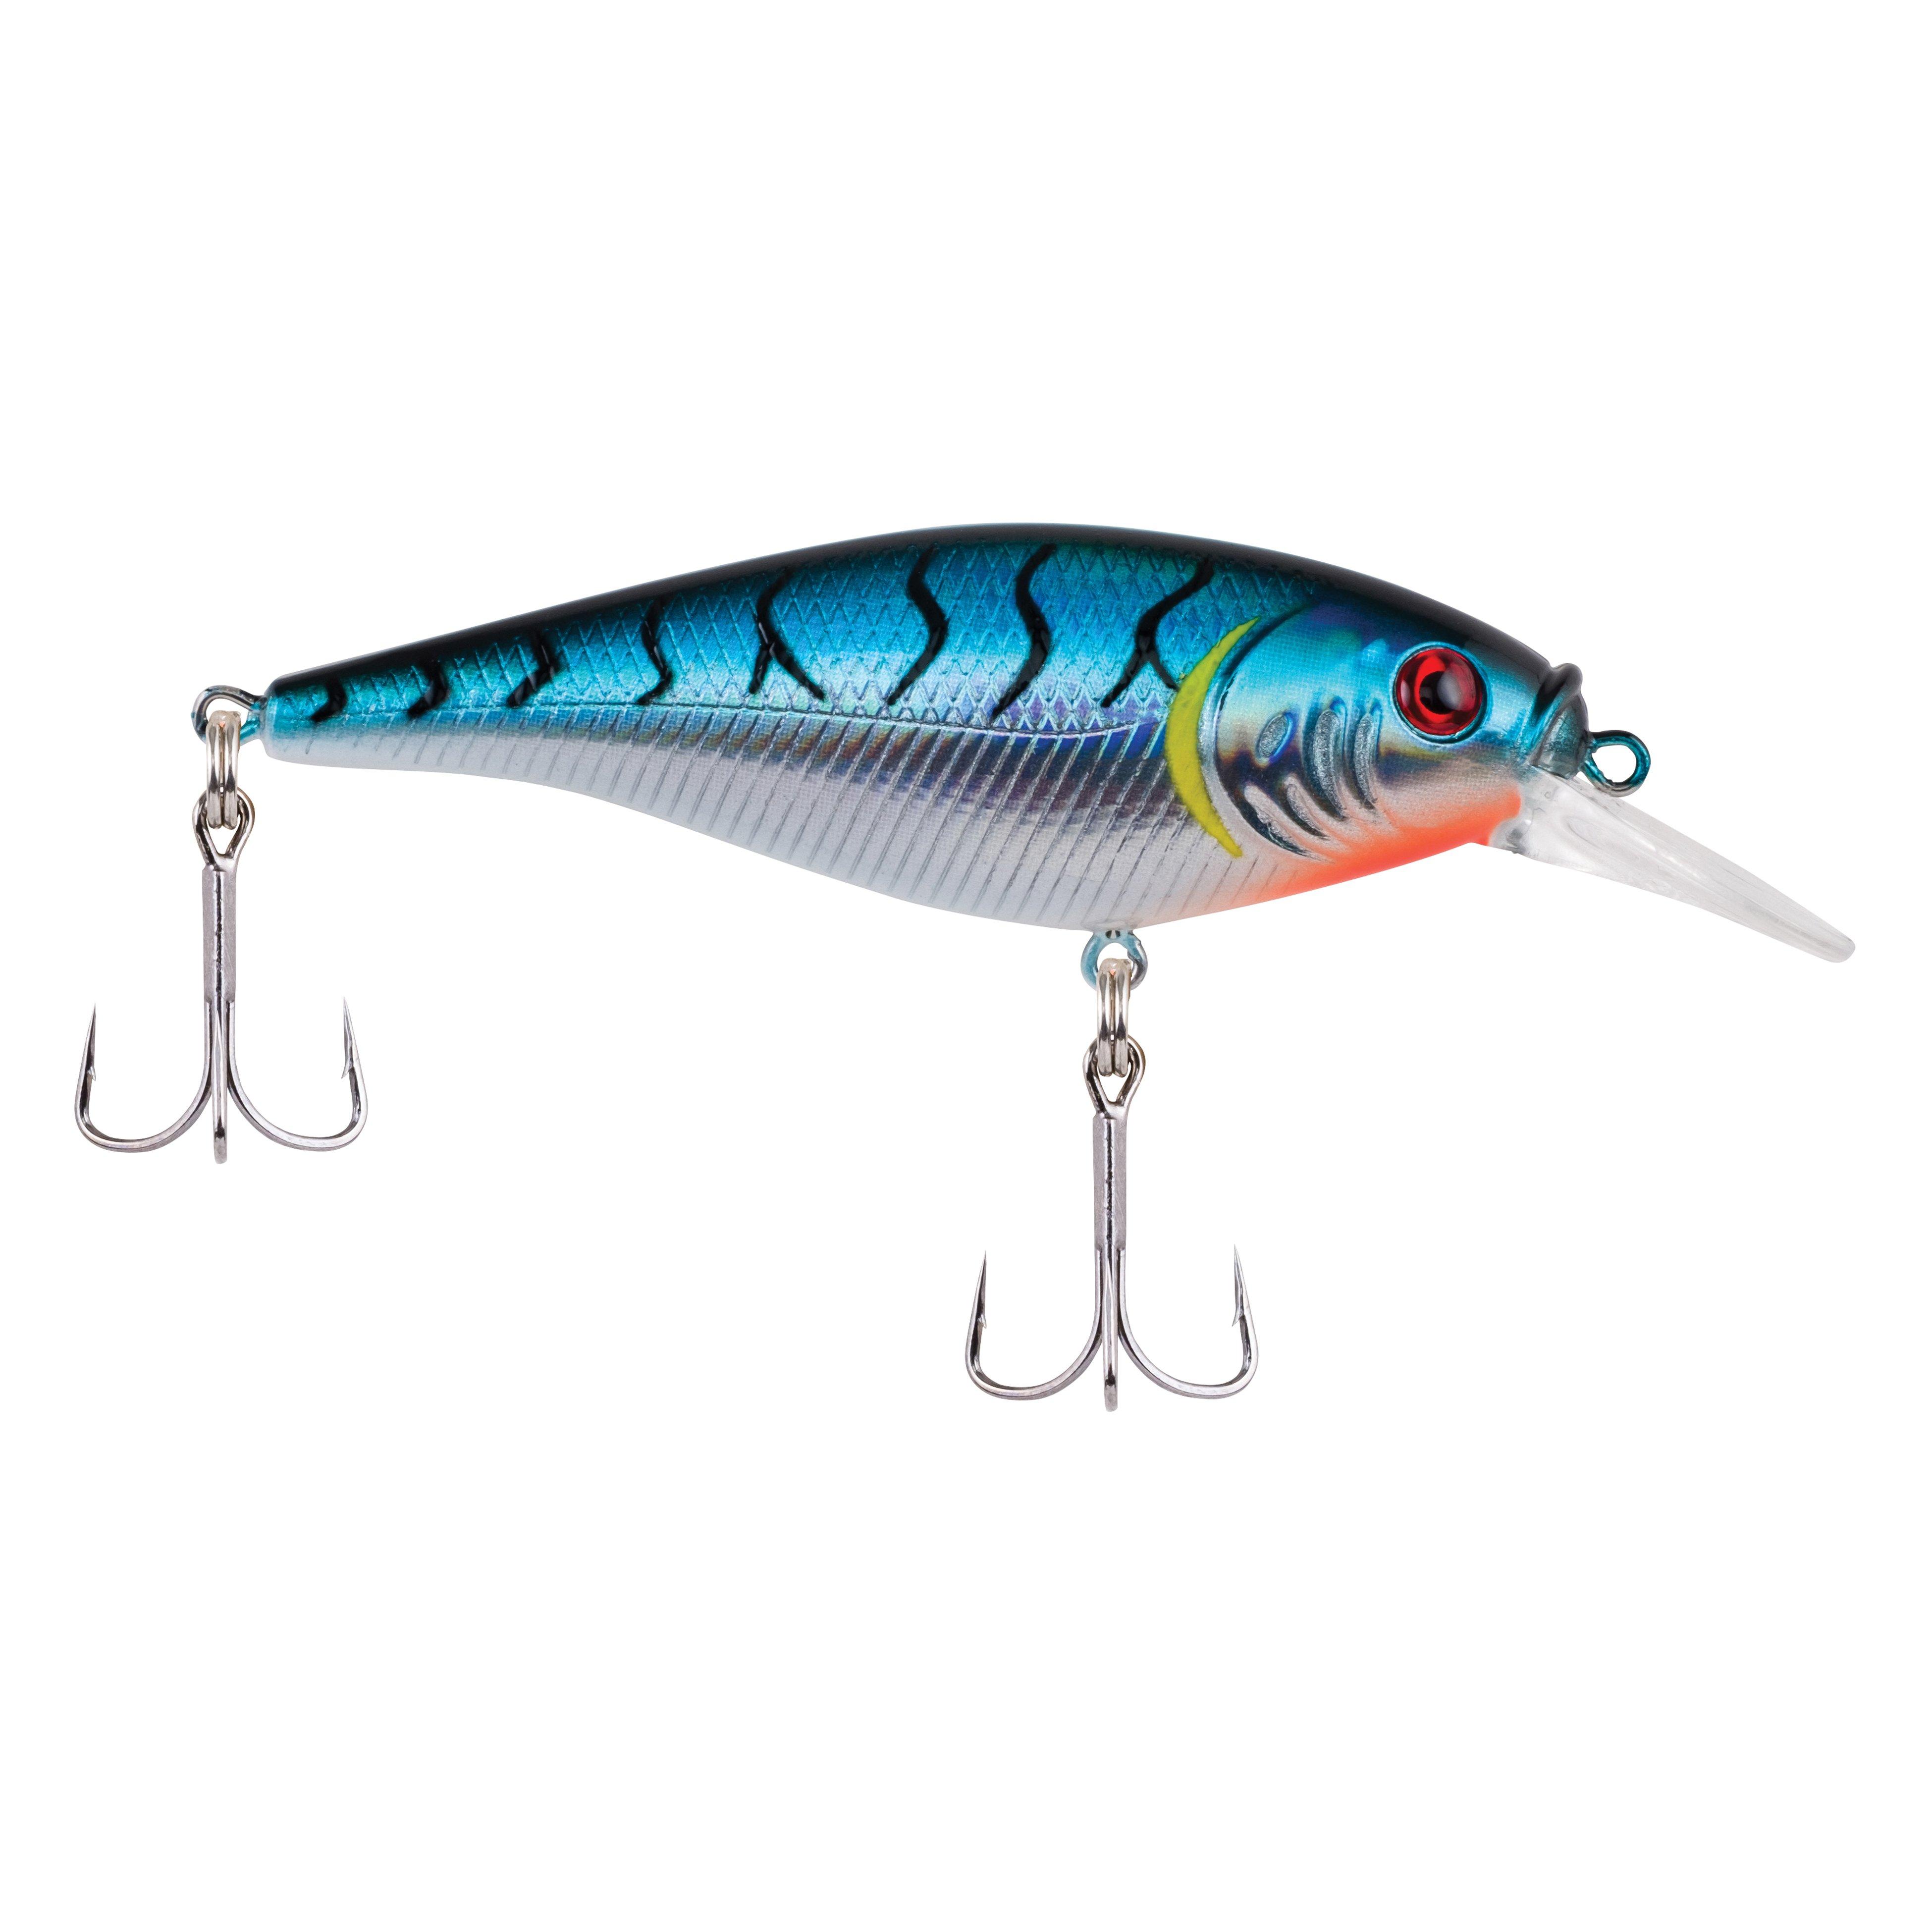 Buy Berkley Flicker Shad Shallow Fishing Lure, Chartreuse Pearl, 1/6 oz,  2in  5cm Crankbaits, Size, Profile and Dive Depth Imitates Real Shad,  Equipped with Fusion19 Hook Online at Lowest Price Ever